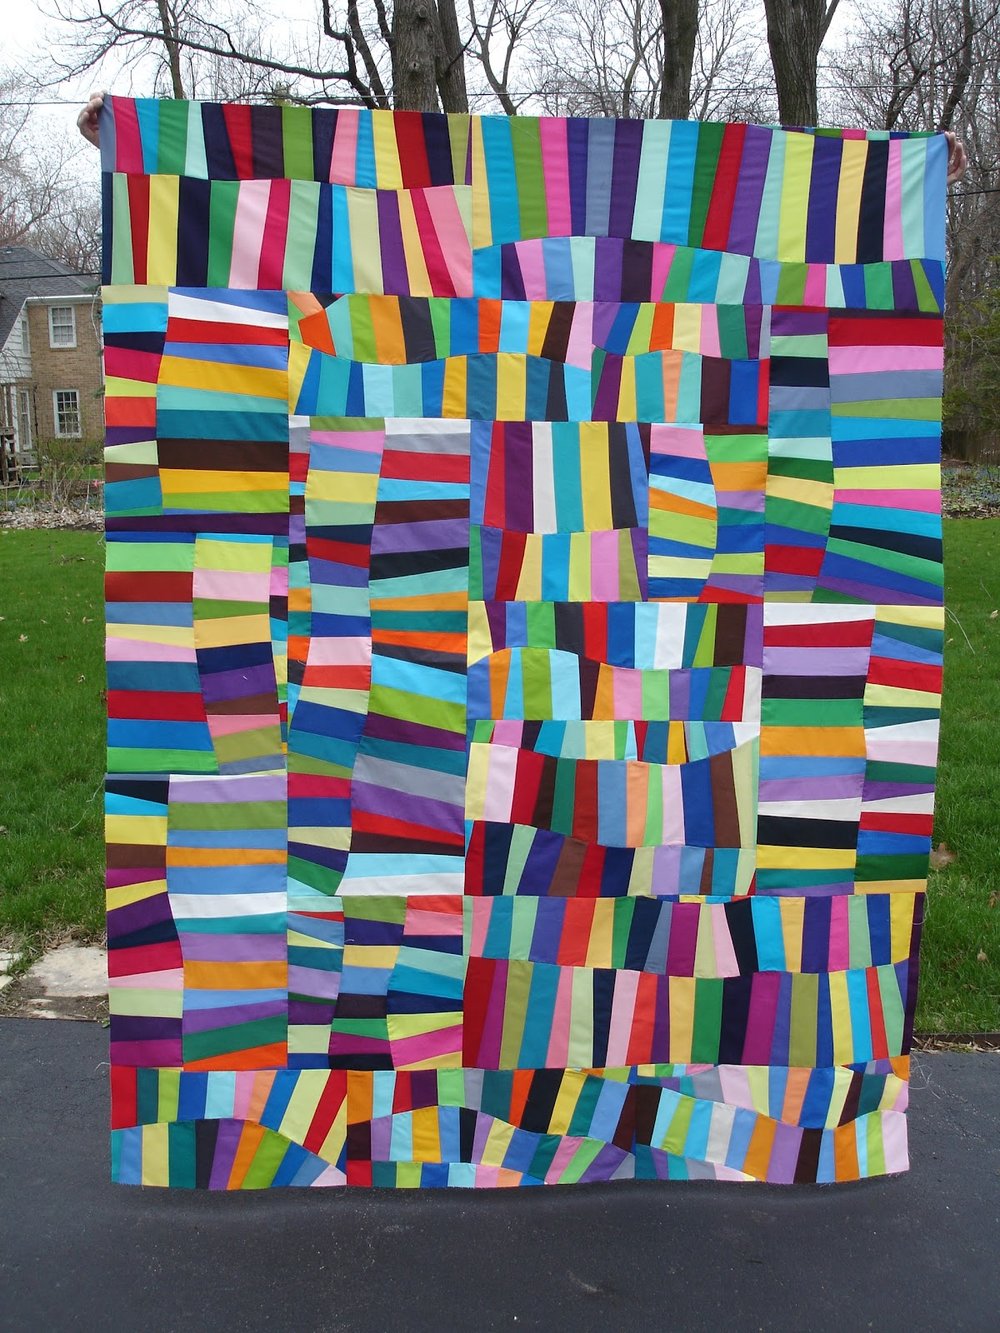 Oodalolly Quilt project by Elaine of Dashasel Sews